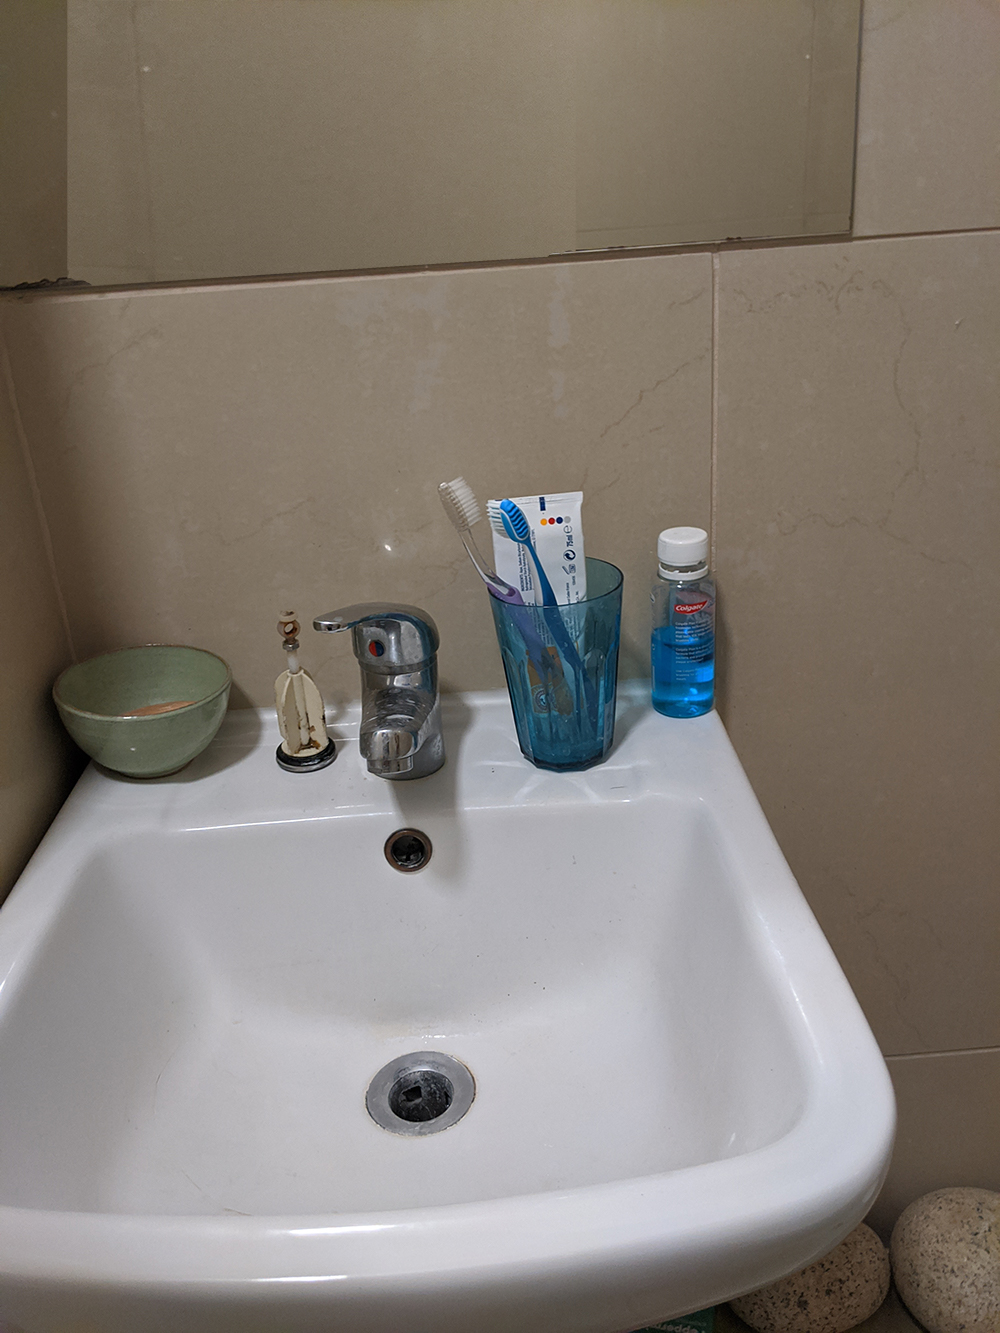 A photo of the sink which was too large.